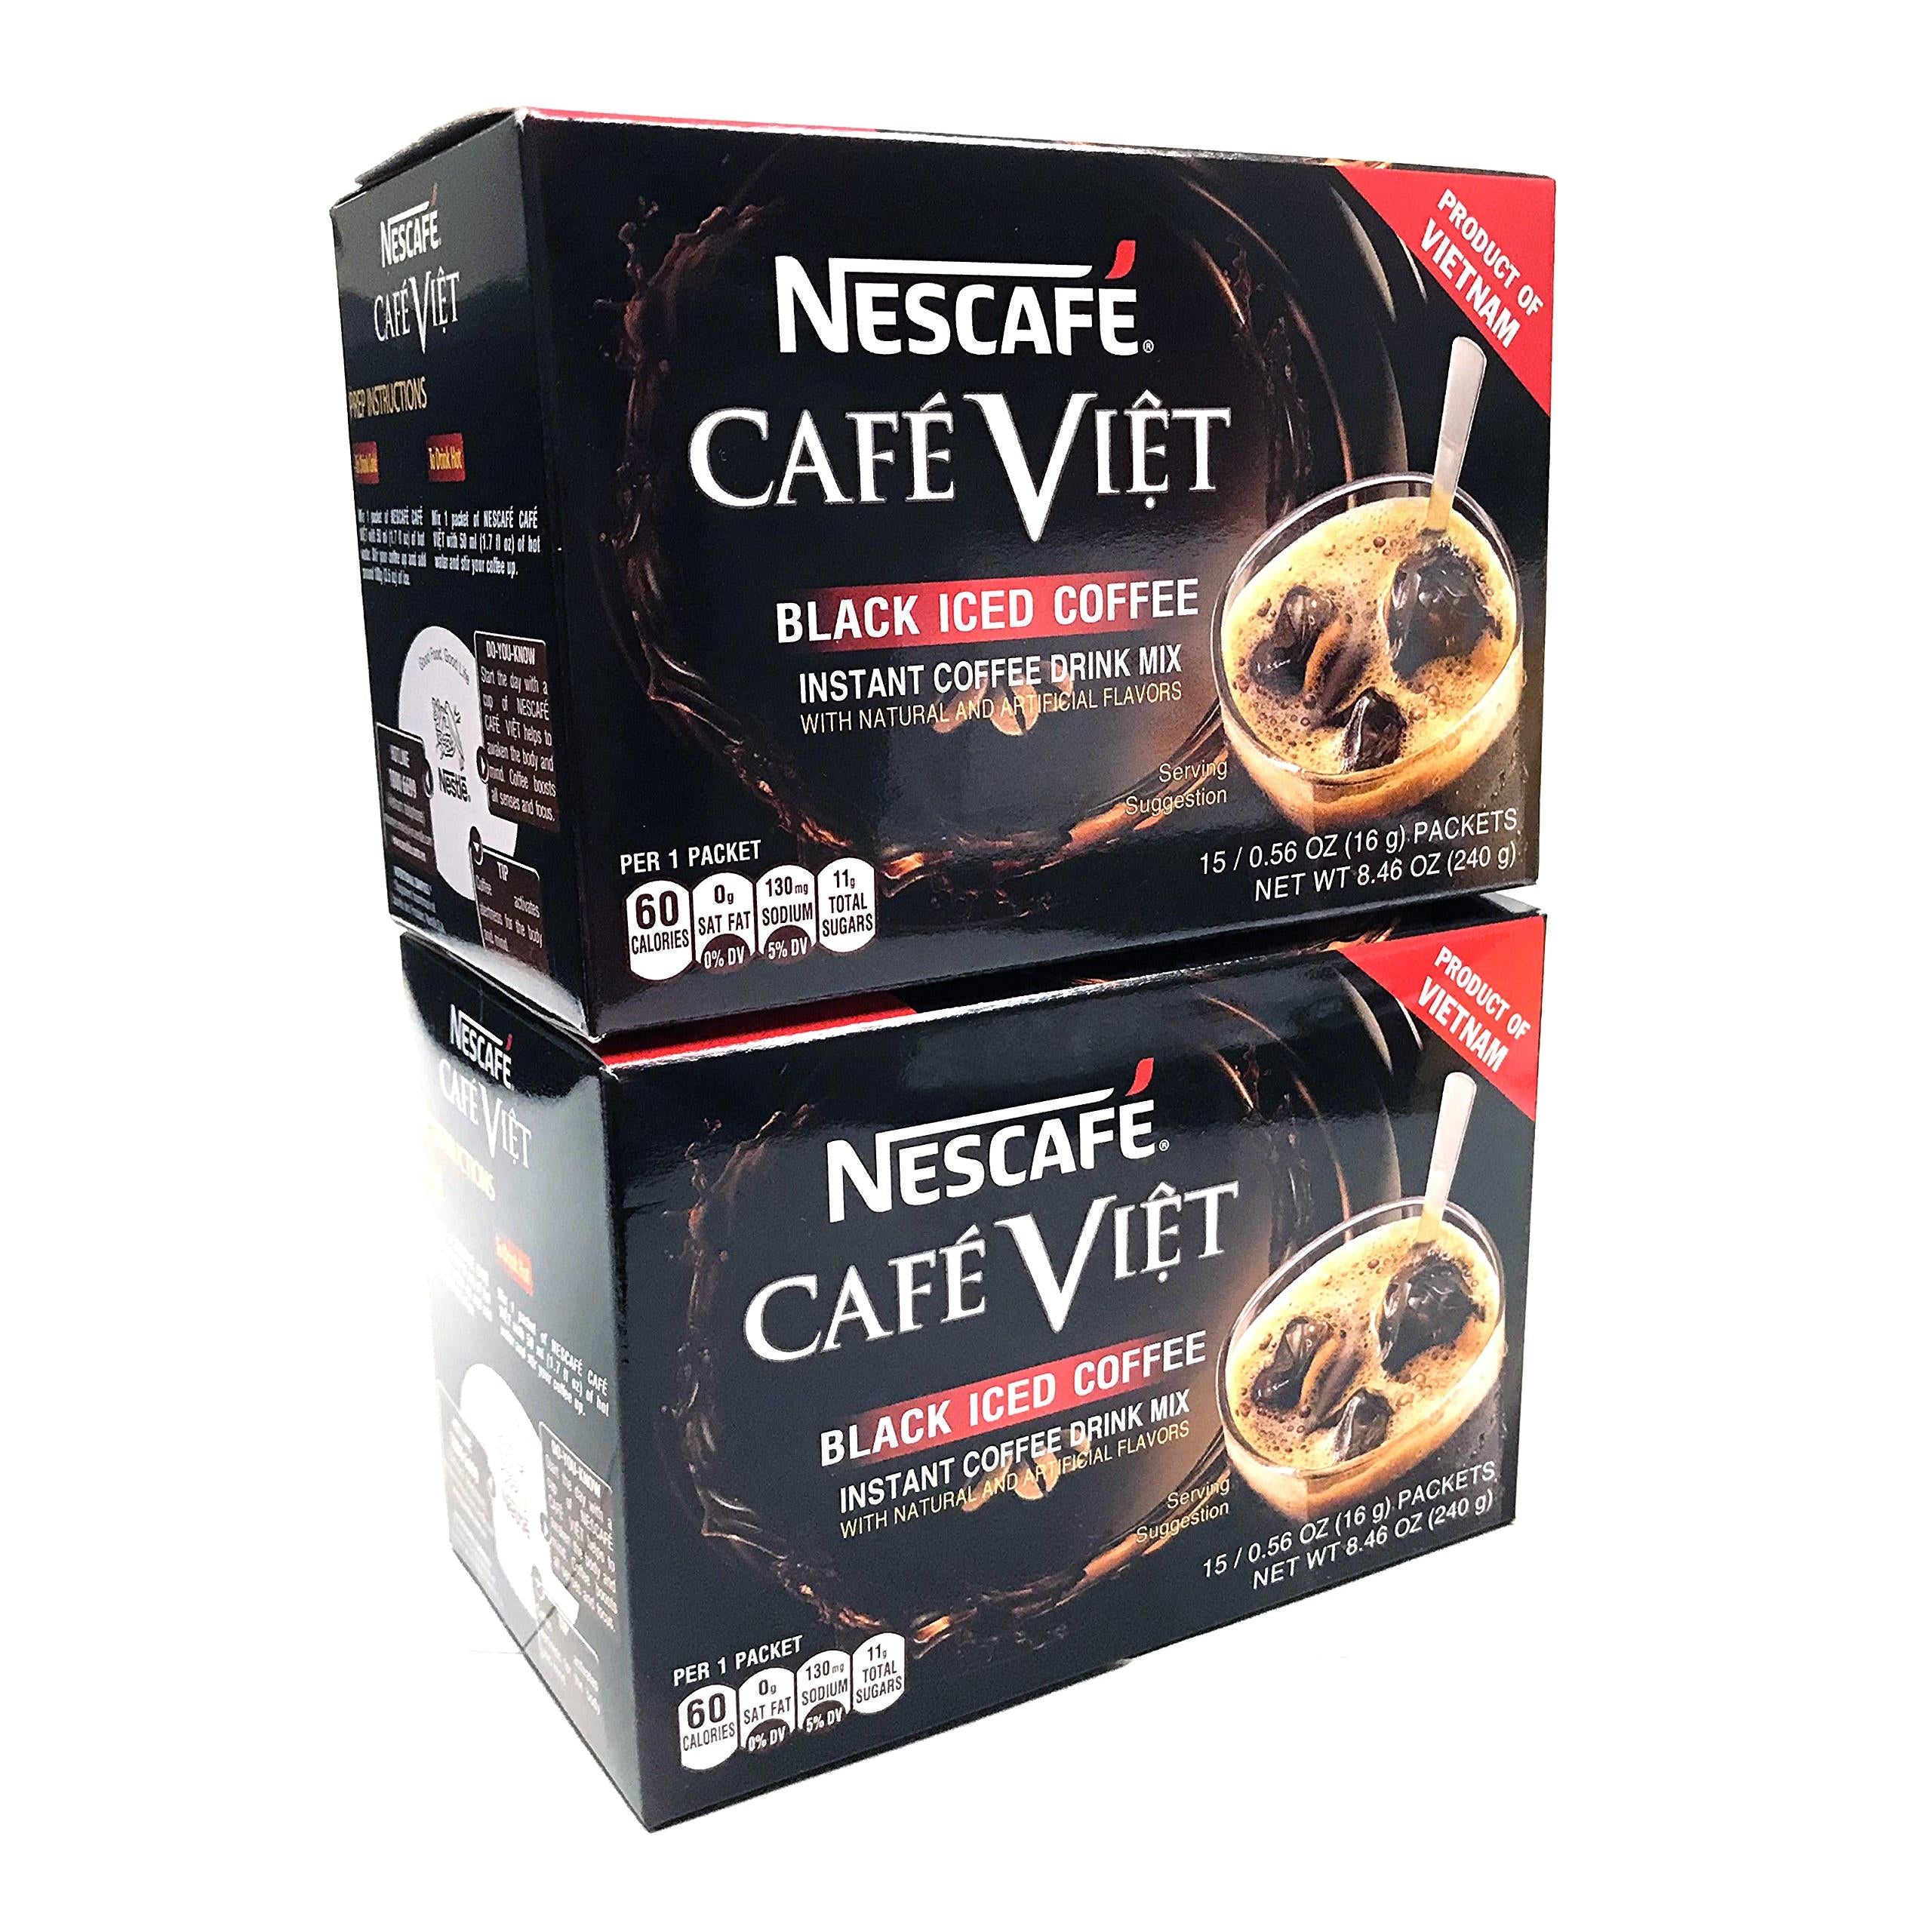 Nescafe Cafe Viet Black Iced Coffee Instant Coffee 15 Packets x 16g, Pack of 2